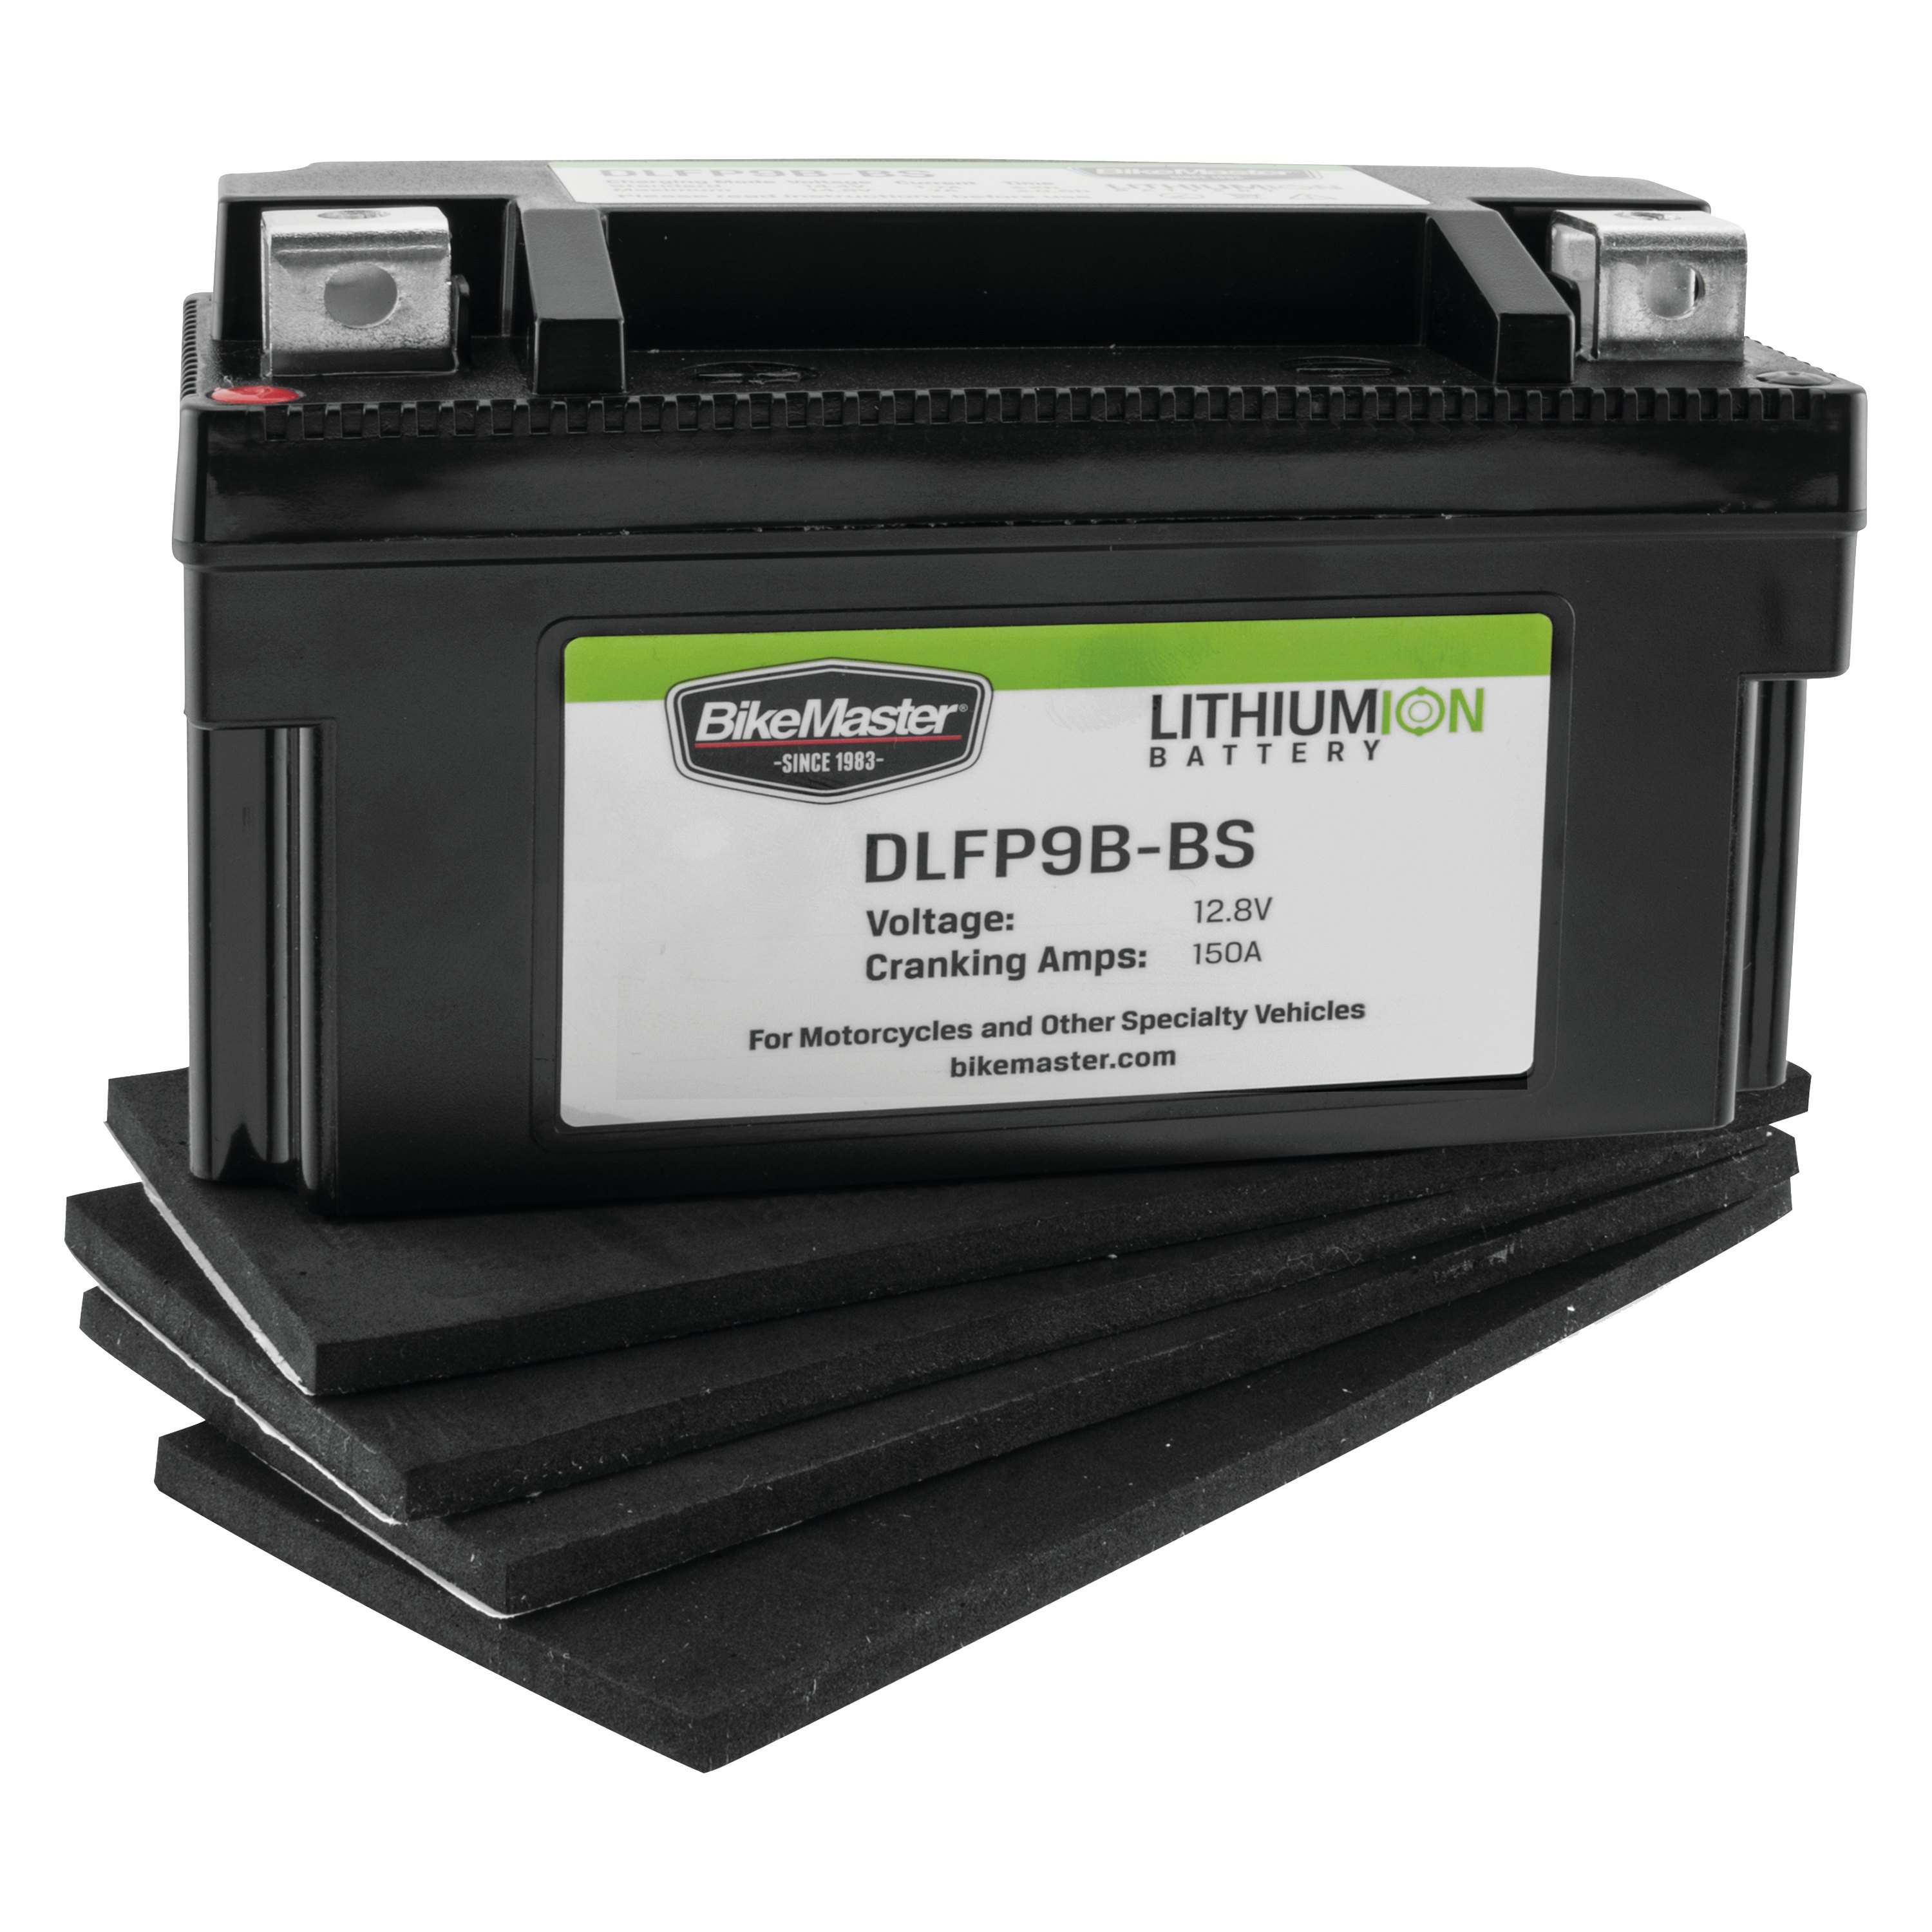 Lon battery. Lithium ion Battery. Байкмастер. Kenworth Lithium ion Battery for Motorcycle. ARPS Lithium-ion.